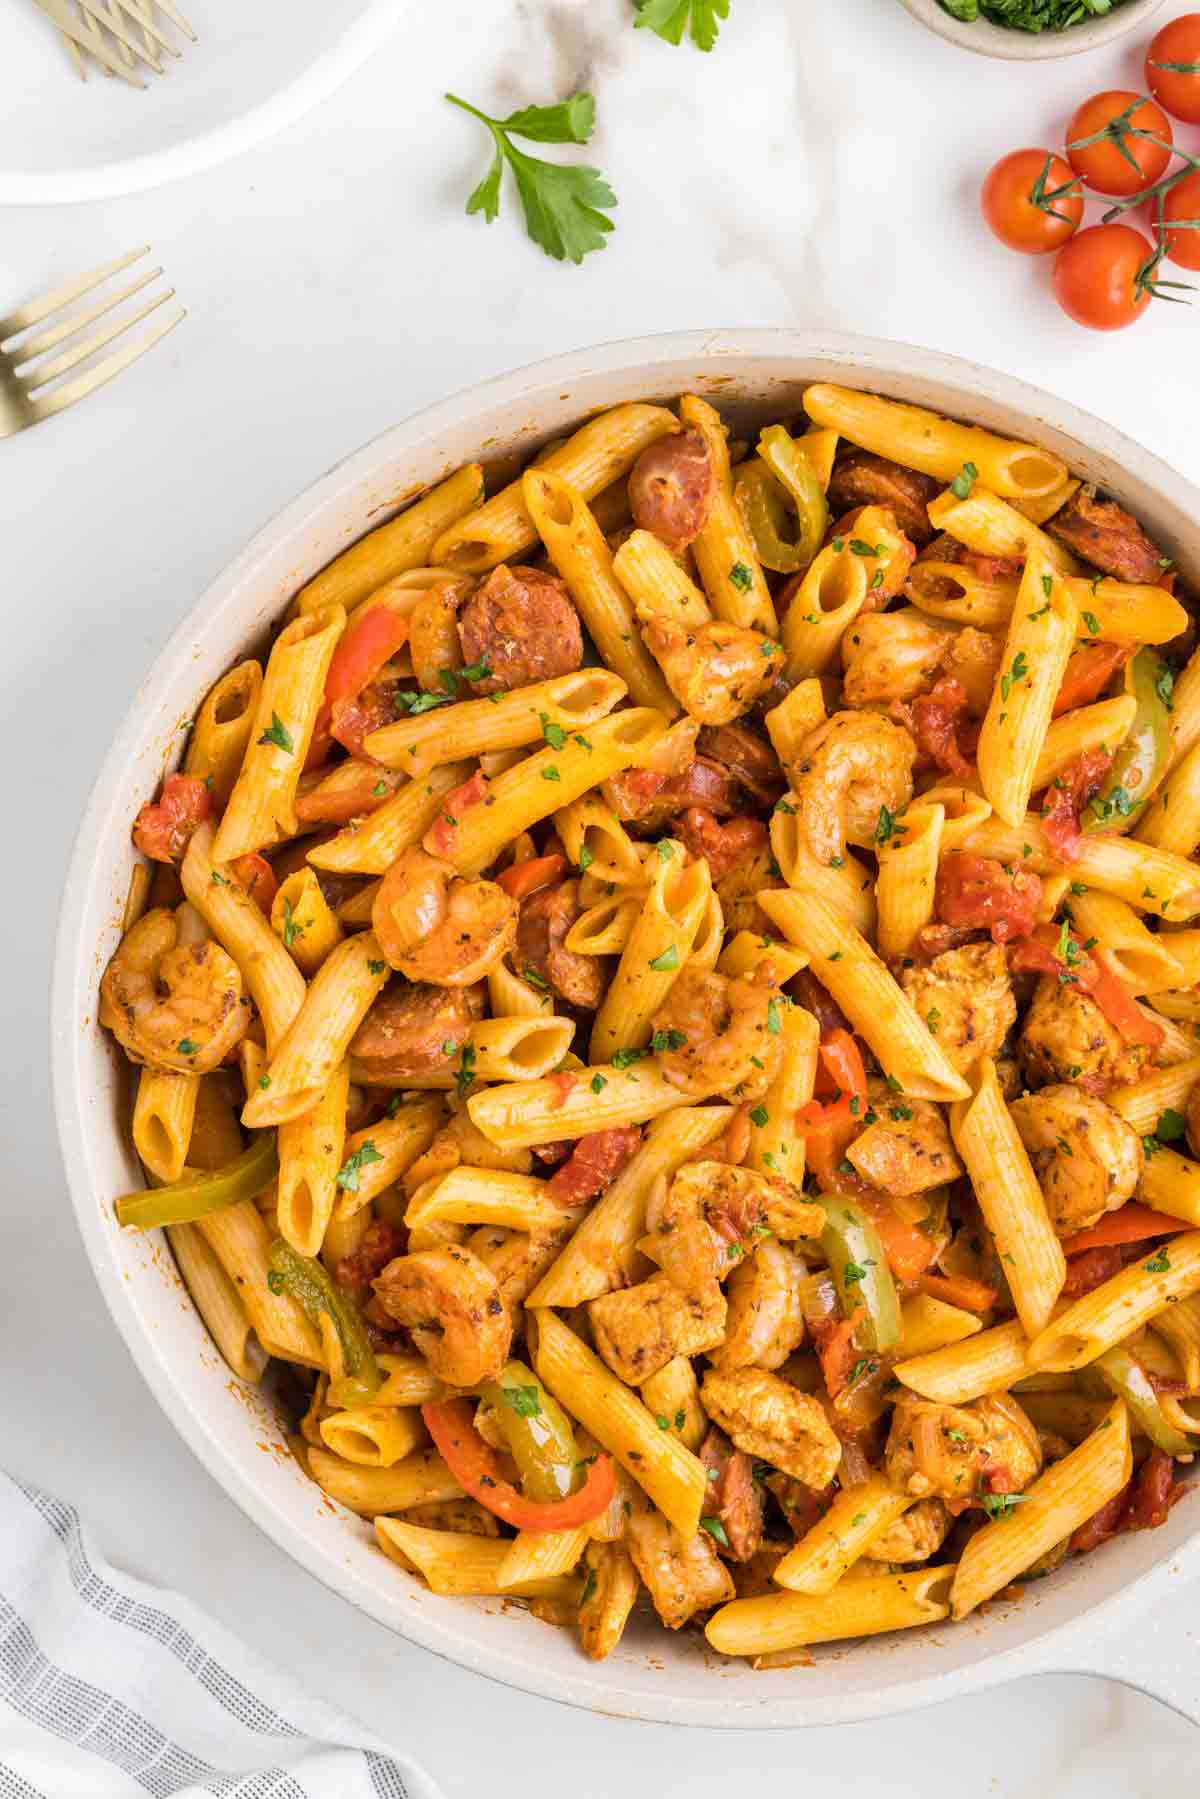 Jambalaya Pasta is a hearty penne pasta recipe loaded with bell peppers, shrimp, chicken breast chunks and andouille sausage all tossed in a tomato based sauce with a kick from some Cajun seasoning.